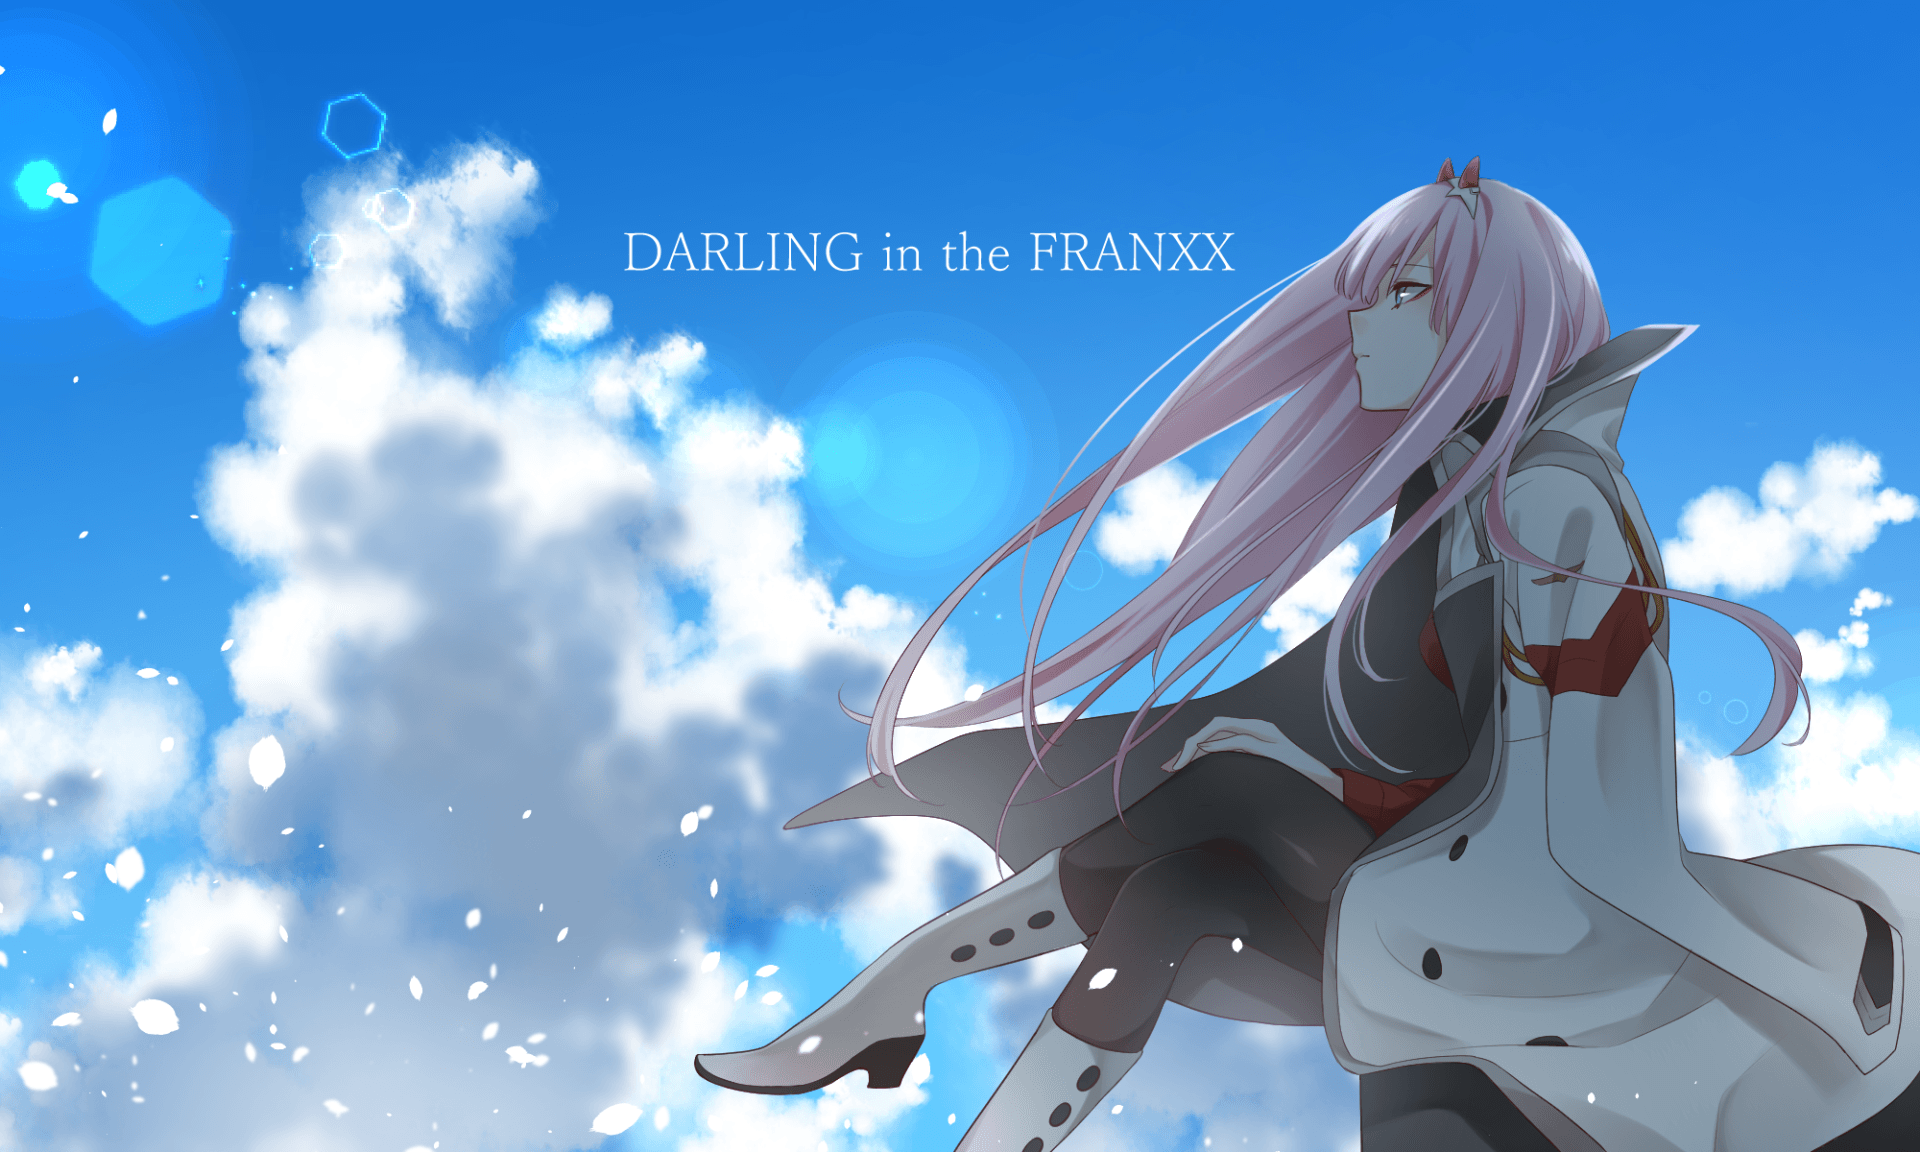 Anime Darling in the FranXX Zero Two (Darling in the FranXX) Wallpaper. Darling in the franxx, Zero two, Anime